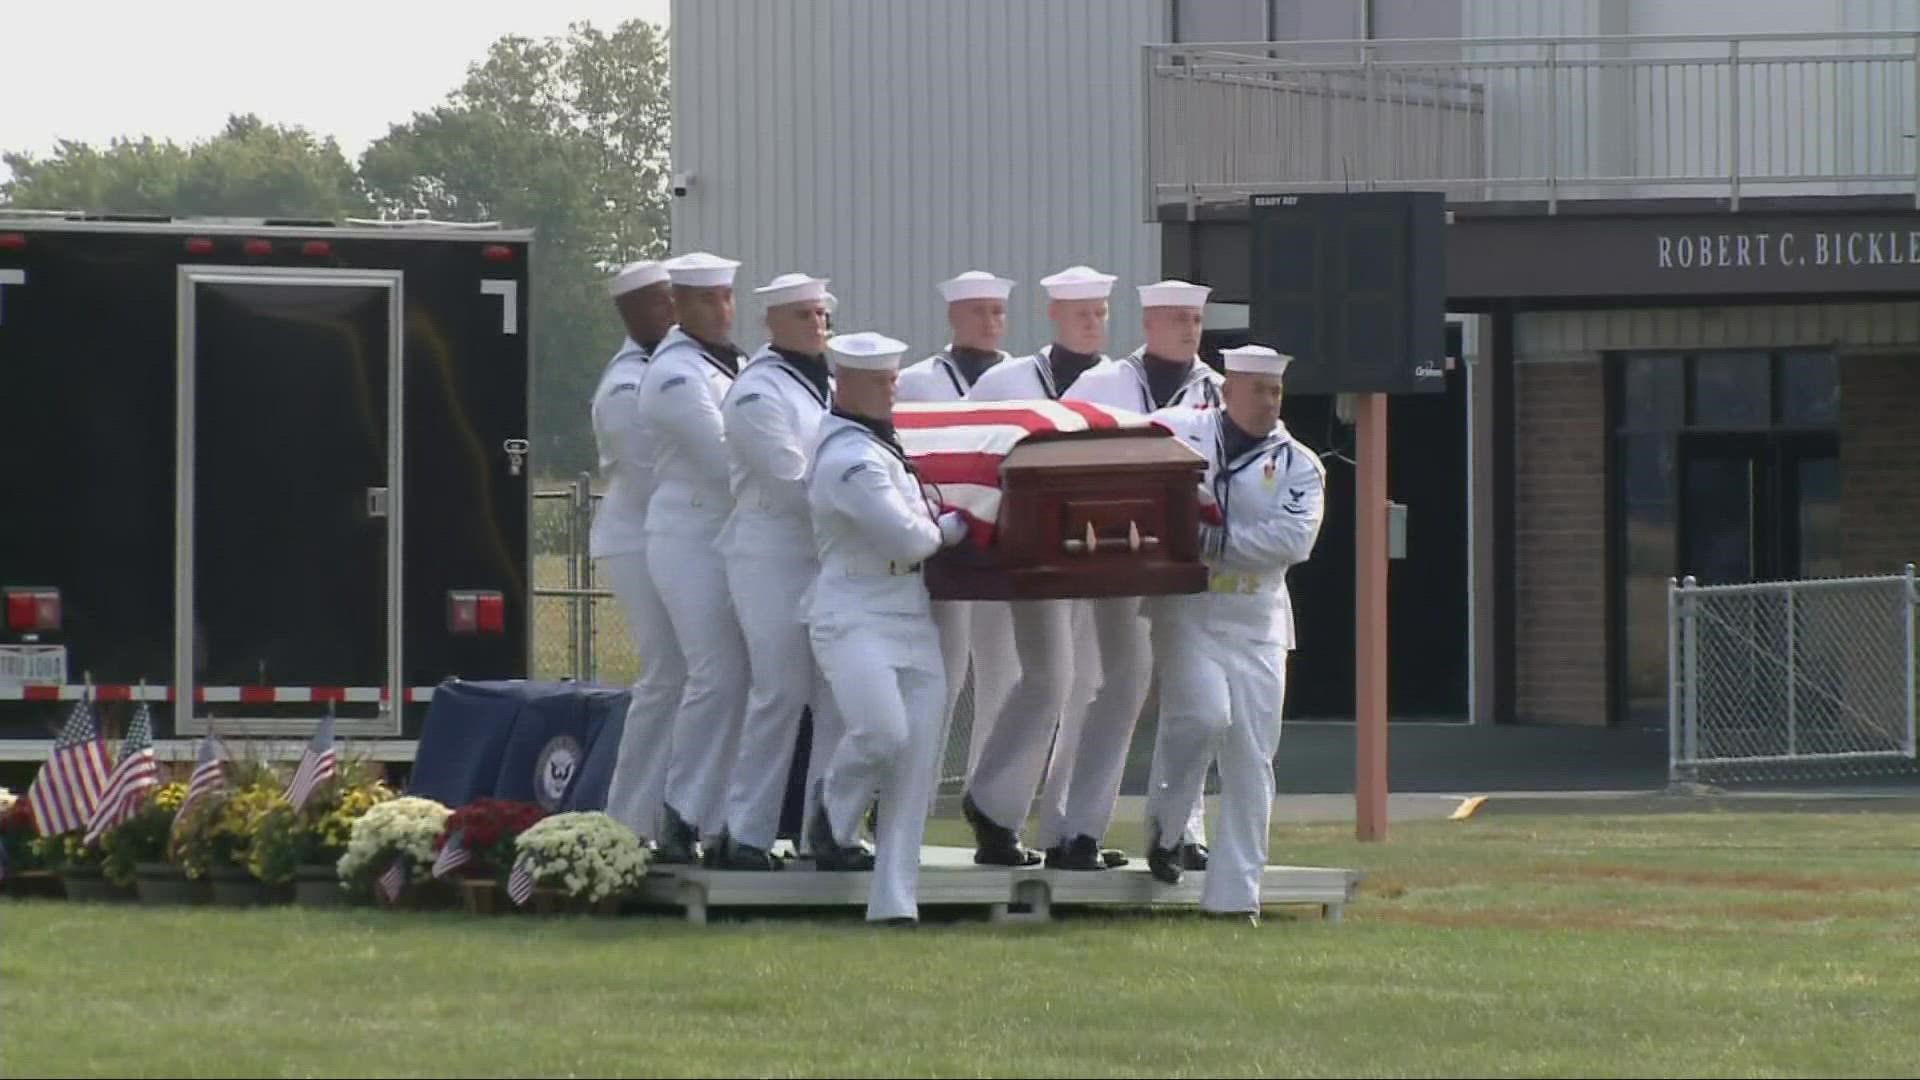 It was a somber day in Ohio as the community honored the life of Navy Corpsman Maxton Soviak, the Erie County native who was killed in Afghanistan last month.